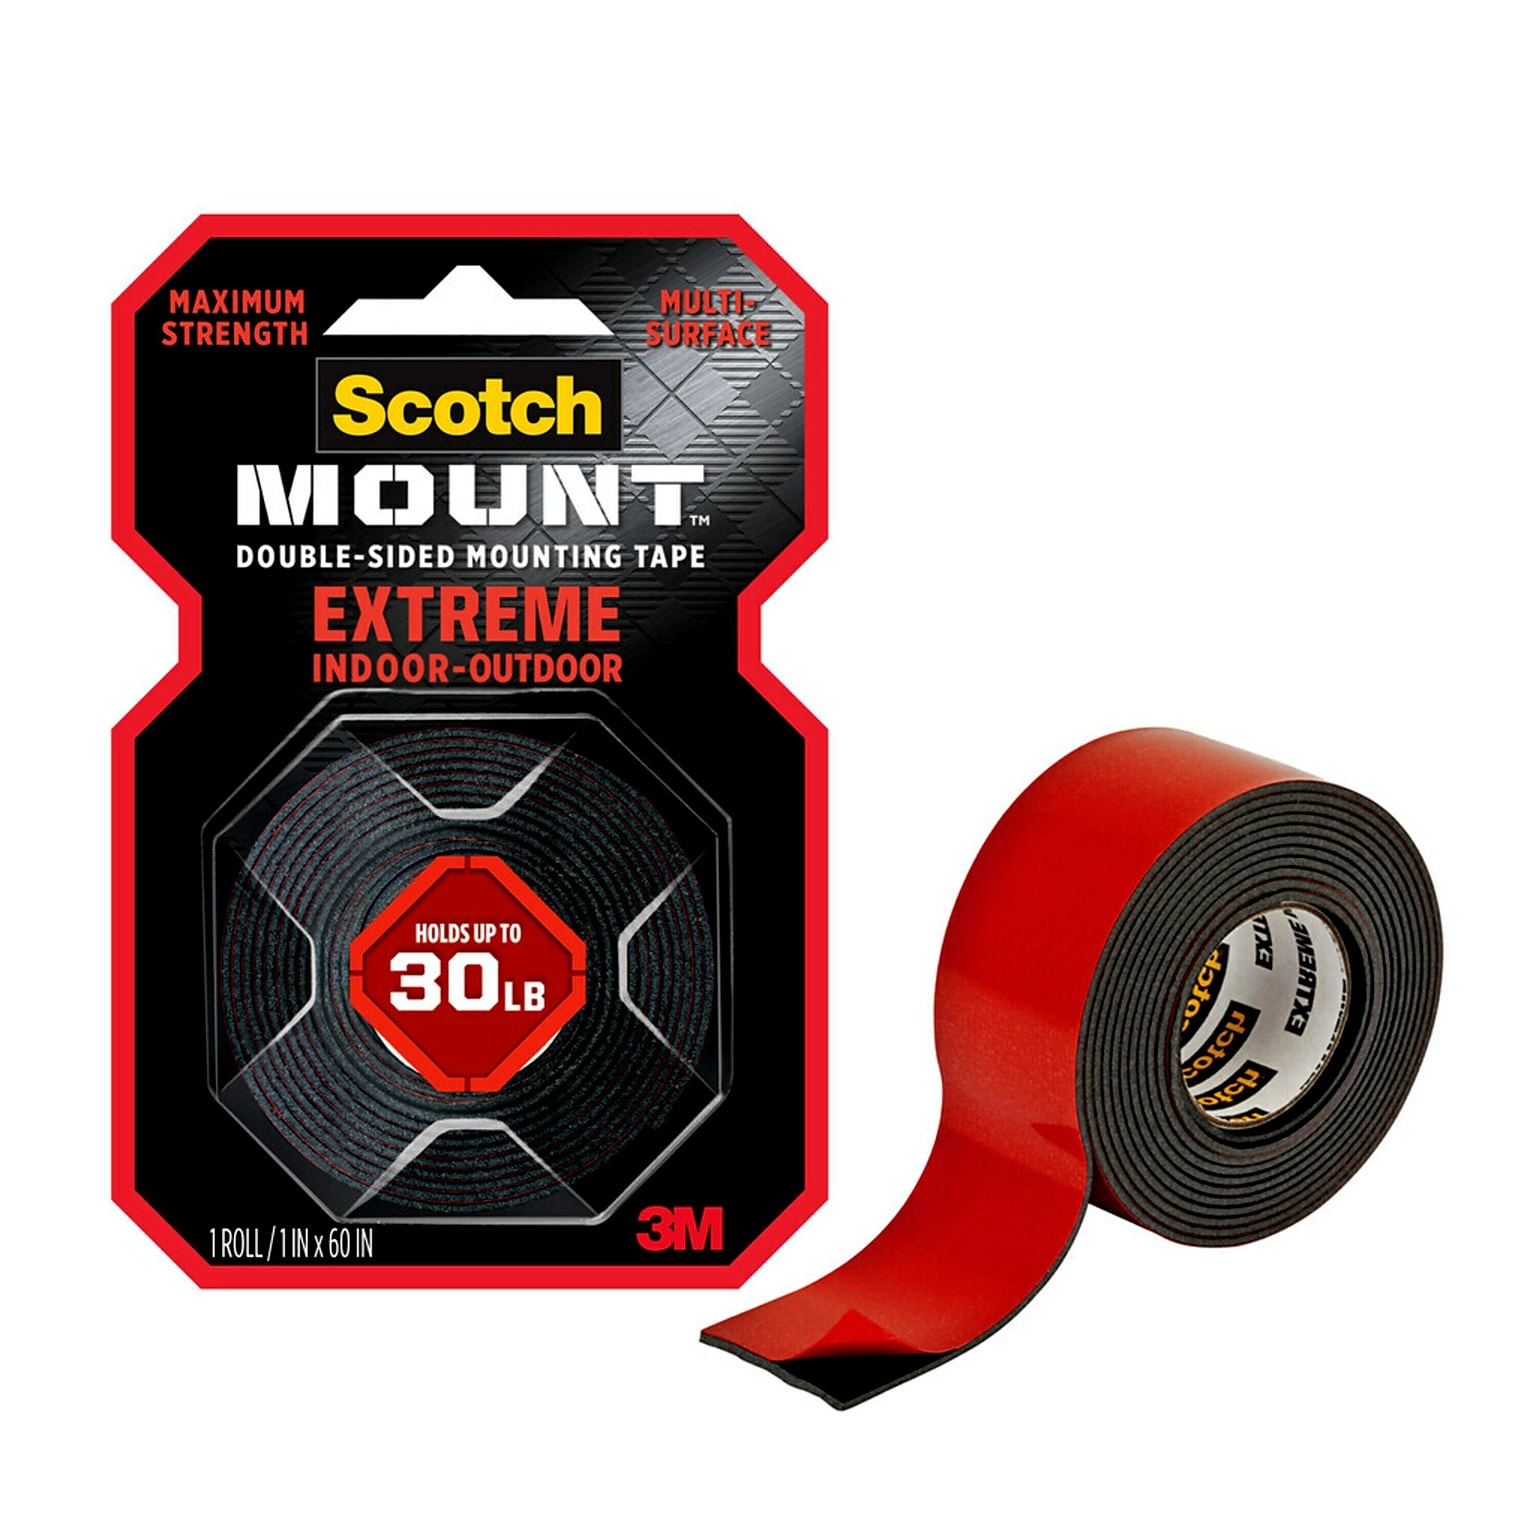 Scotch-Mount Extreme Double-Sided Mounting Tape, 1 x 60, 1 Roll, Black (414P)